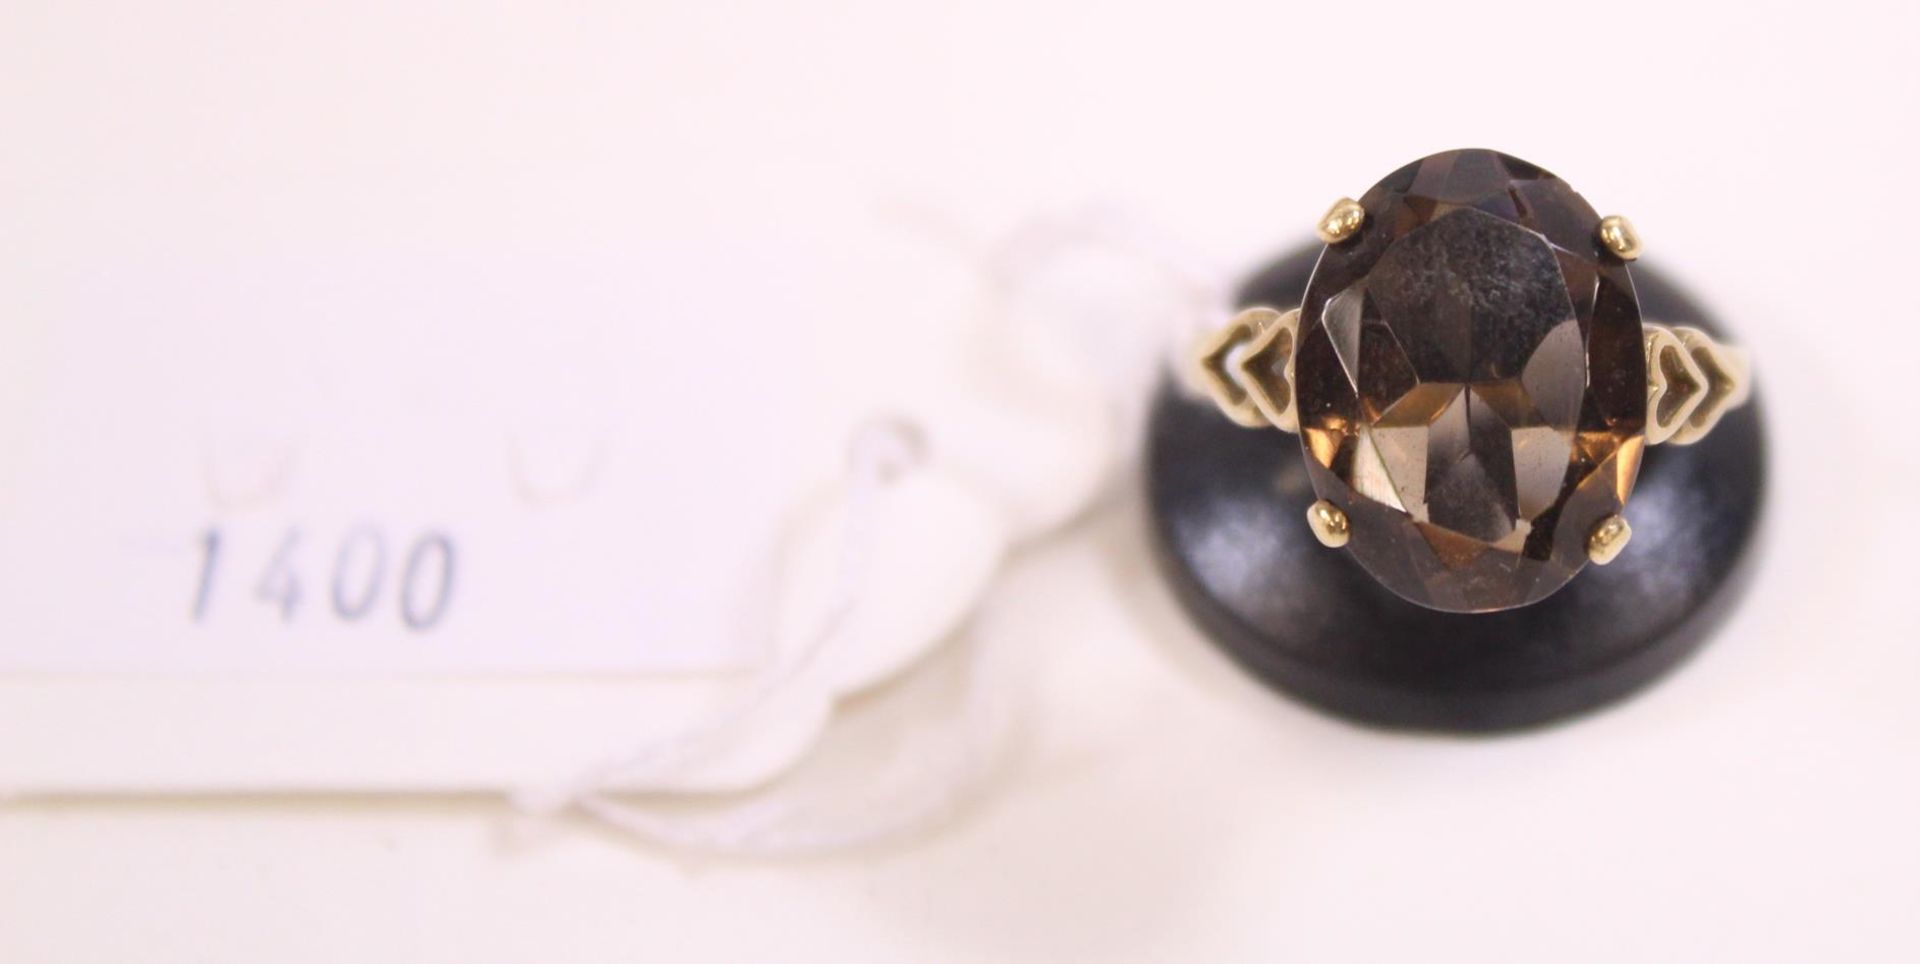 9ct Gold Smokey Quartz/Citrine Ring with heart detail to the sides, size T, total weight 3.69g (est.